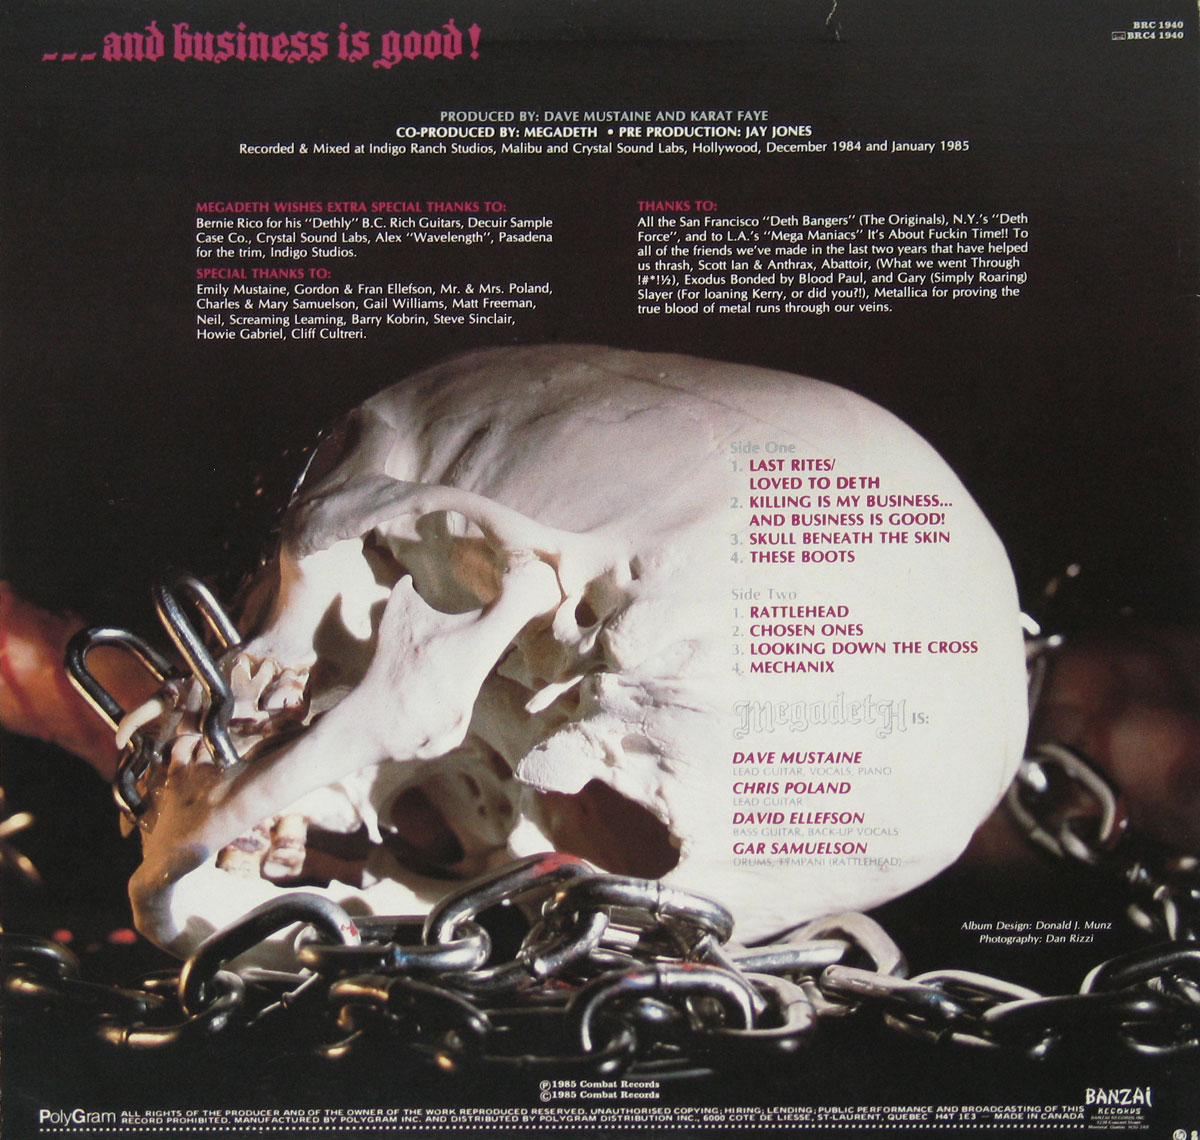 Back Cover  Photo of "Killing is my Business ... ... and Business is Good" Album 